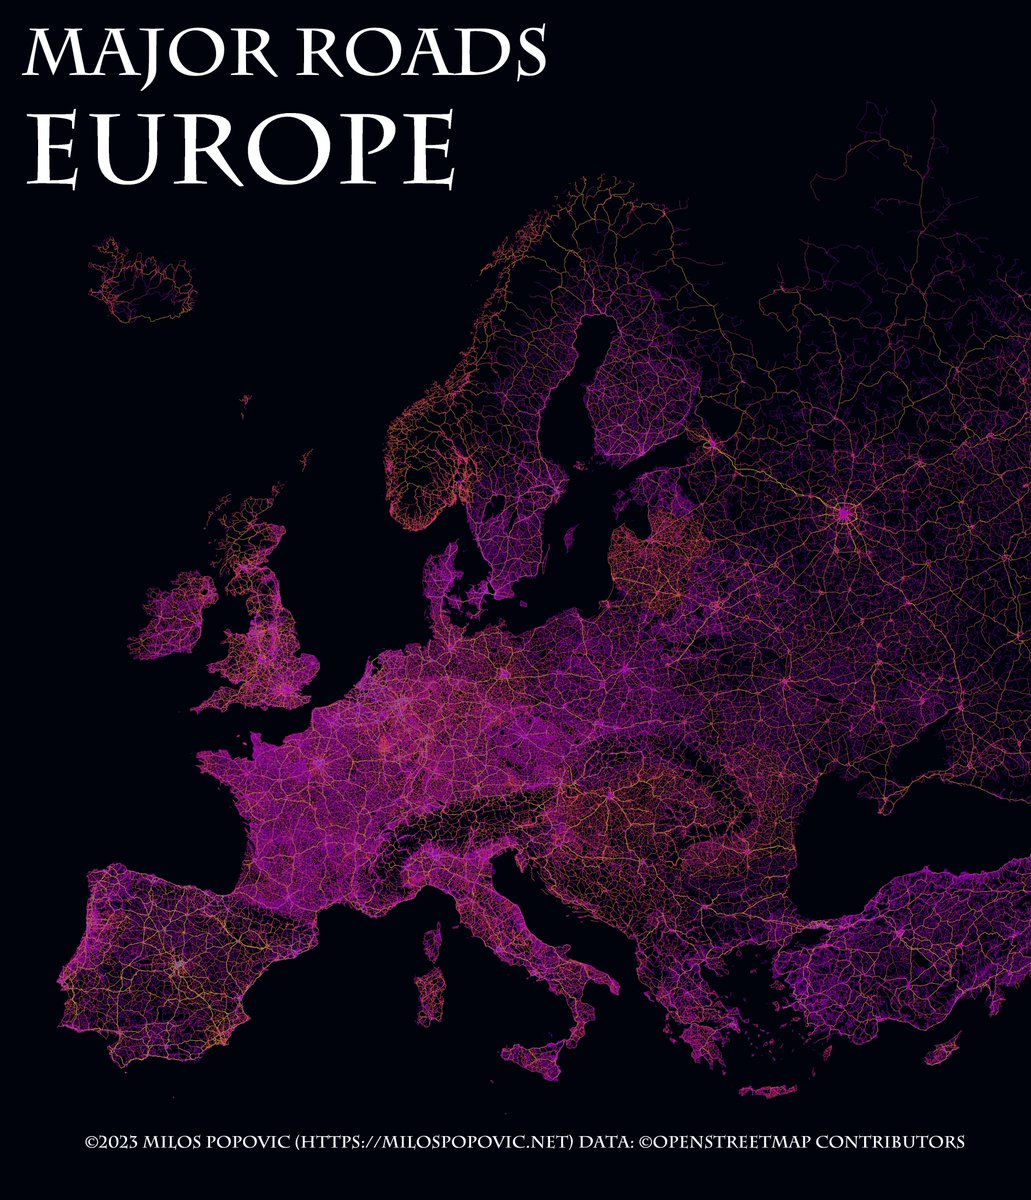 My new map leverages OpenStreetMap data in R to show the extensive network of major roads in Europe 🌍🚗

#RStats #DataScience #osm #dataviz #maps #geospatial